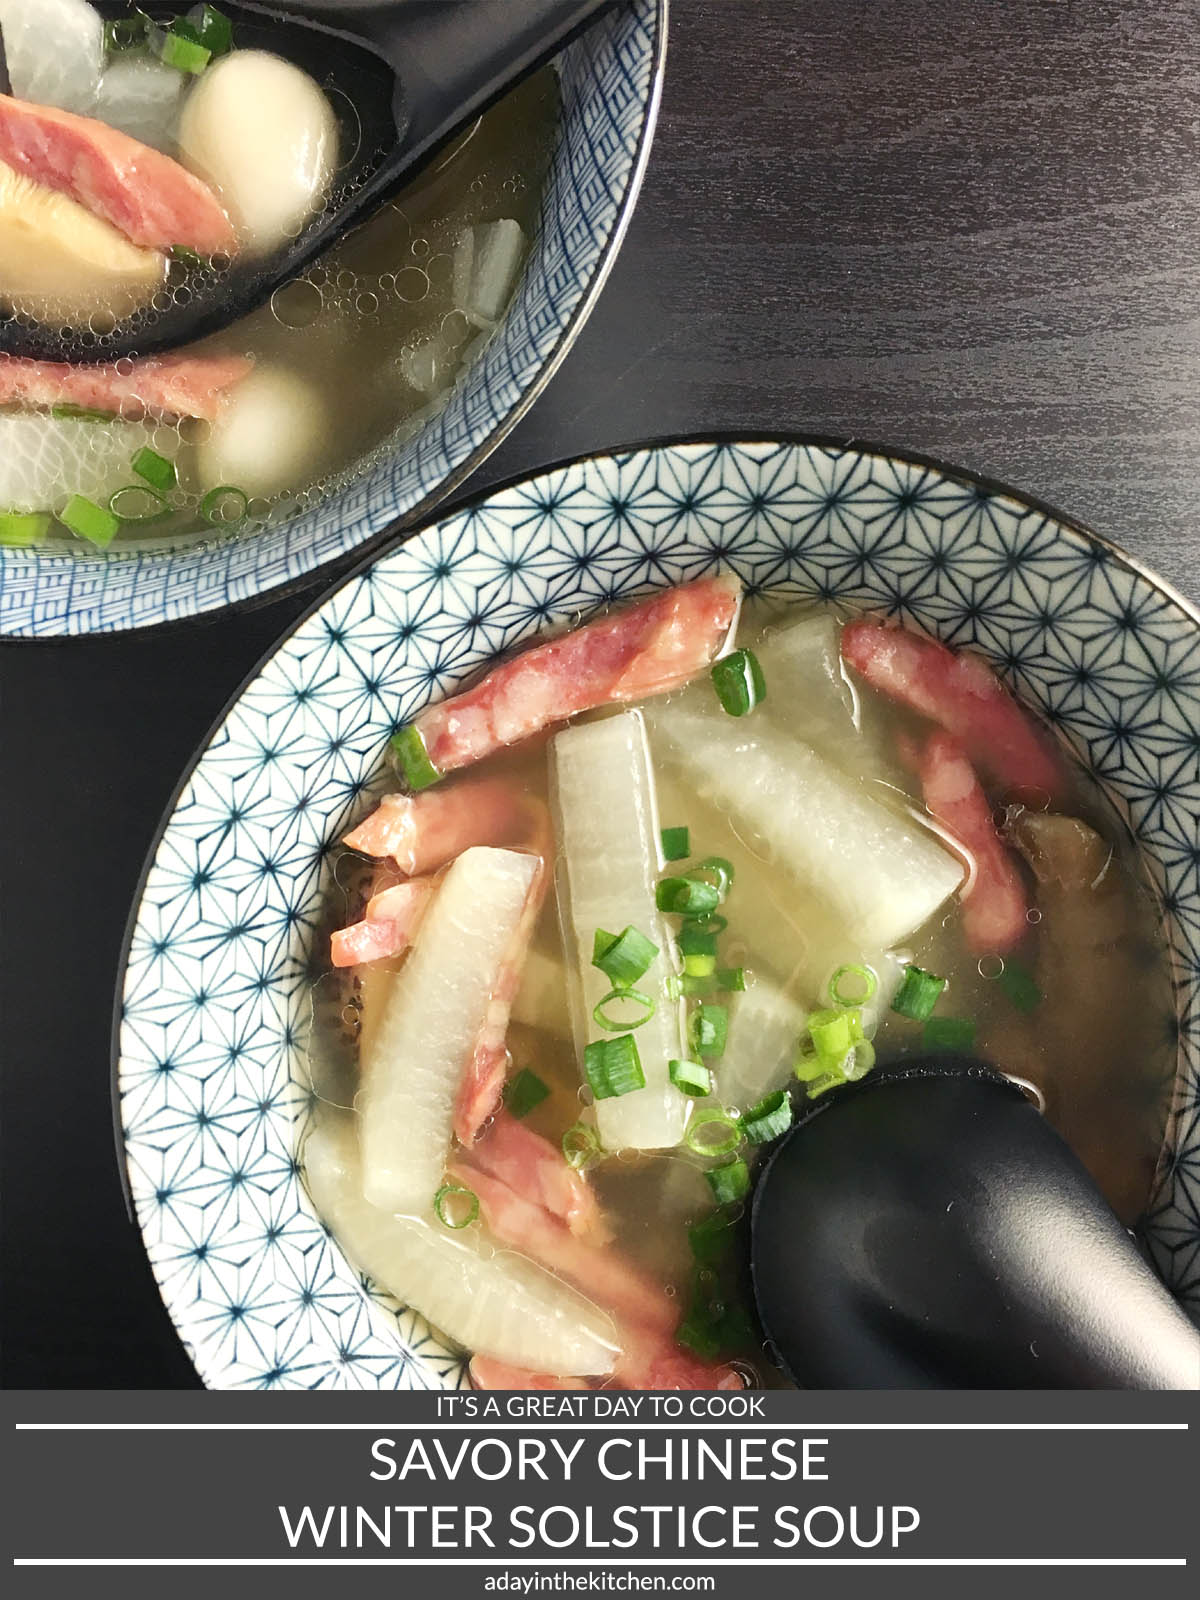 Savory Chinese Winter Solstice Soup